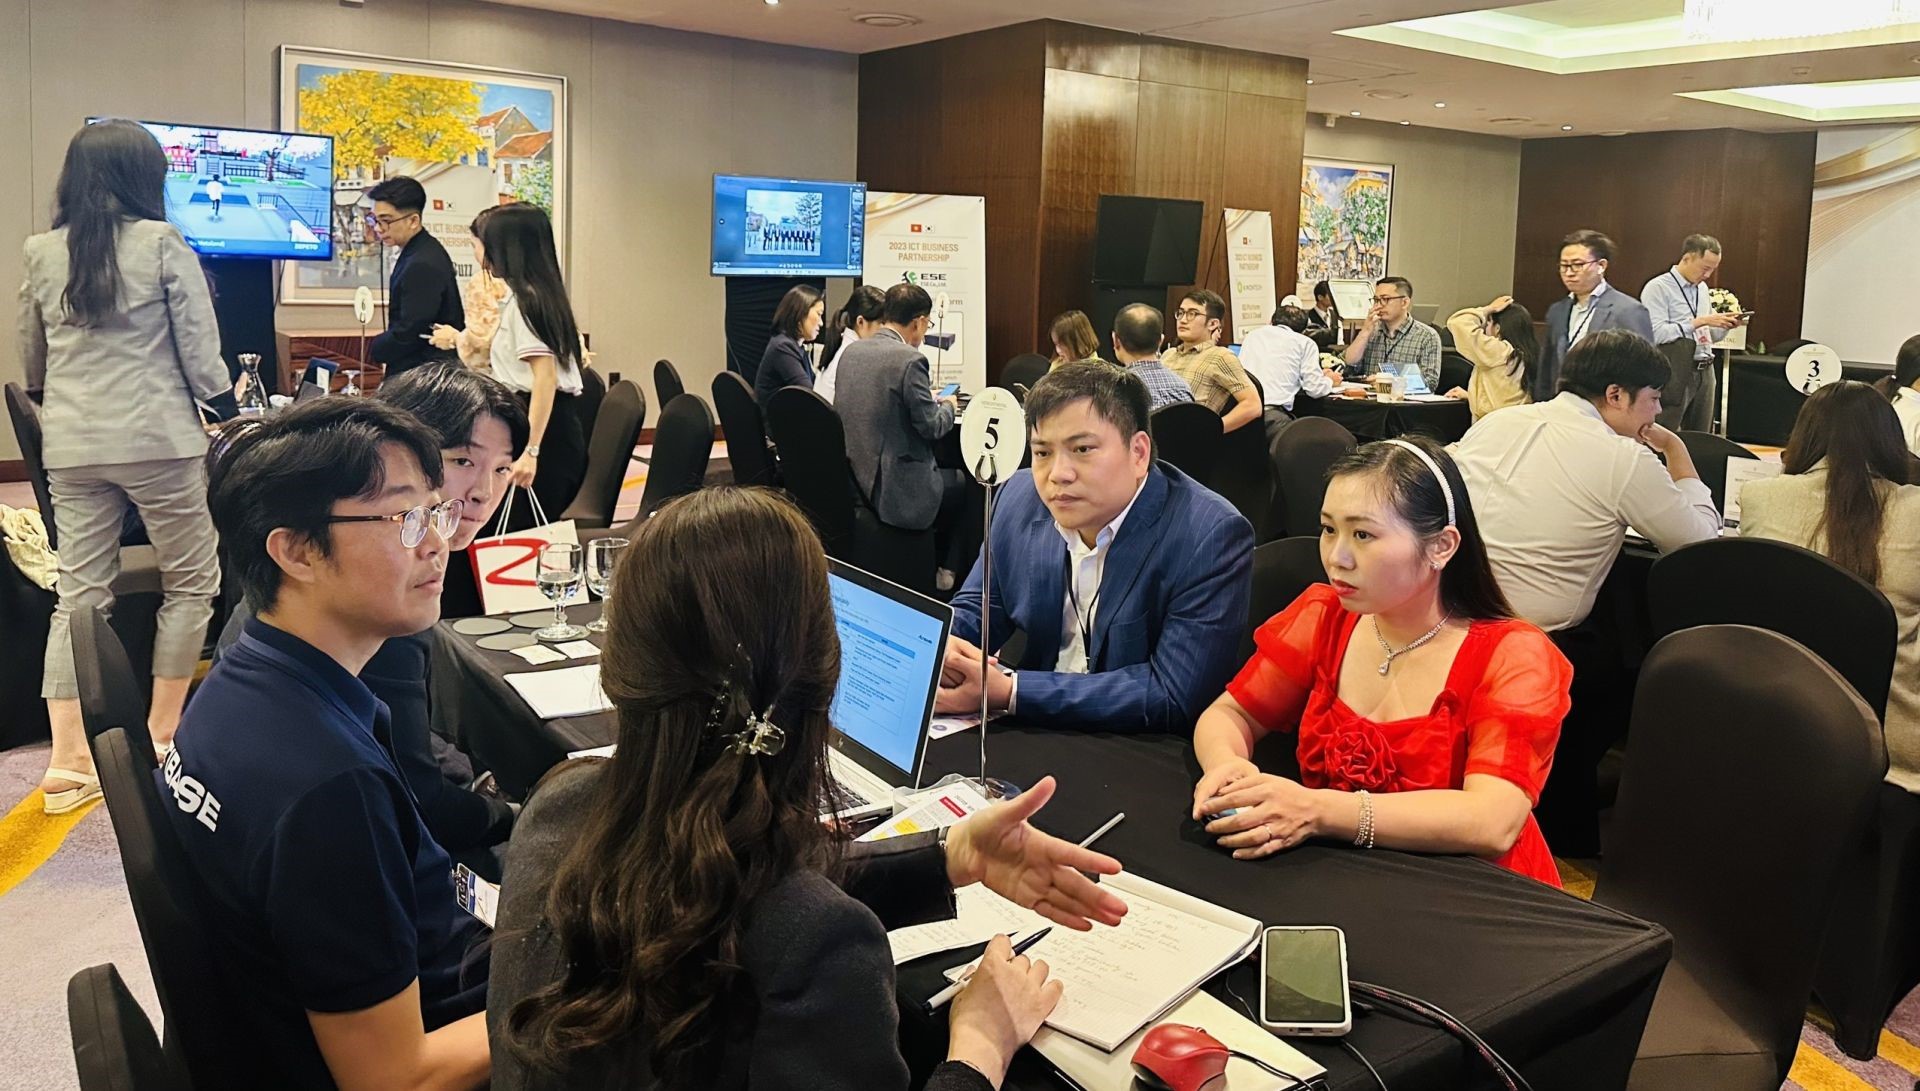 Businesses from Vietnam and Korea shared about their business products.